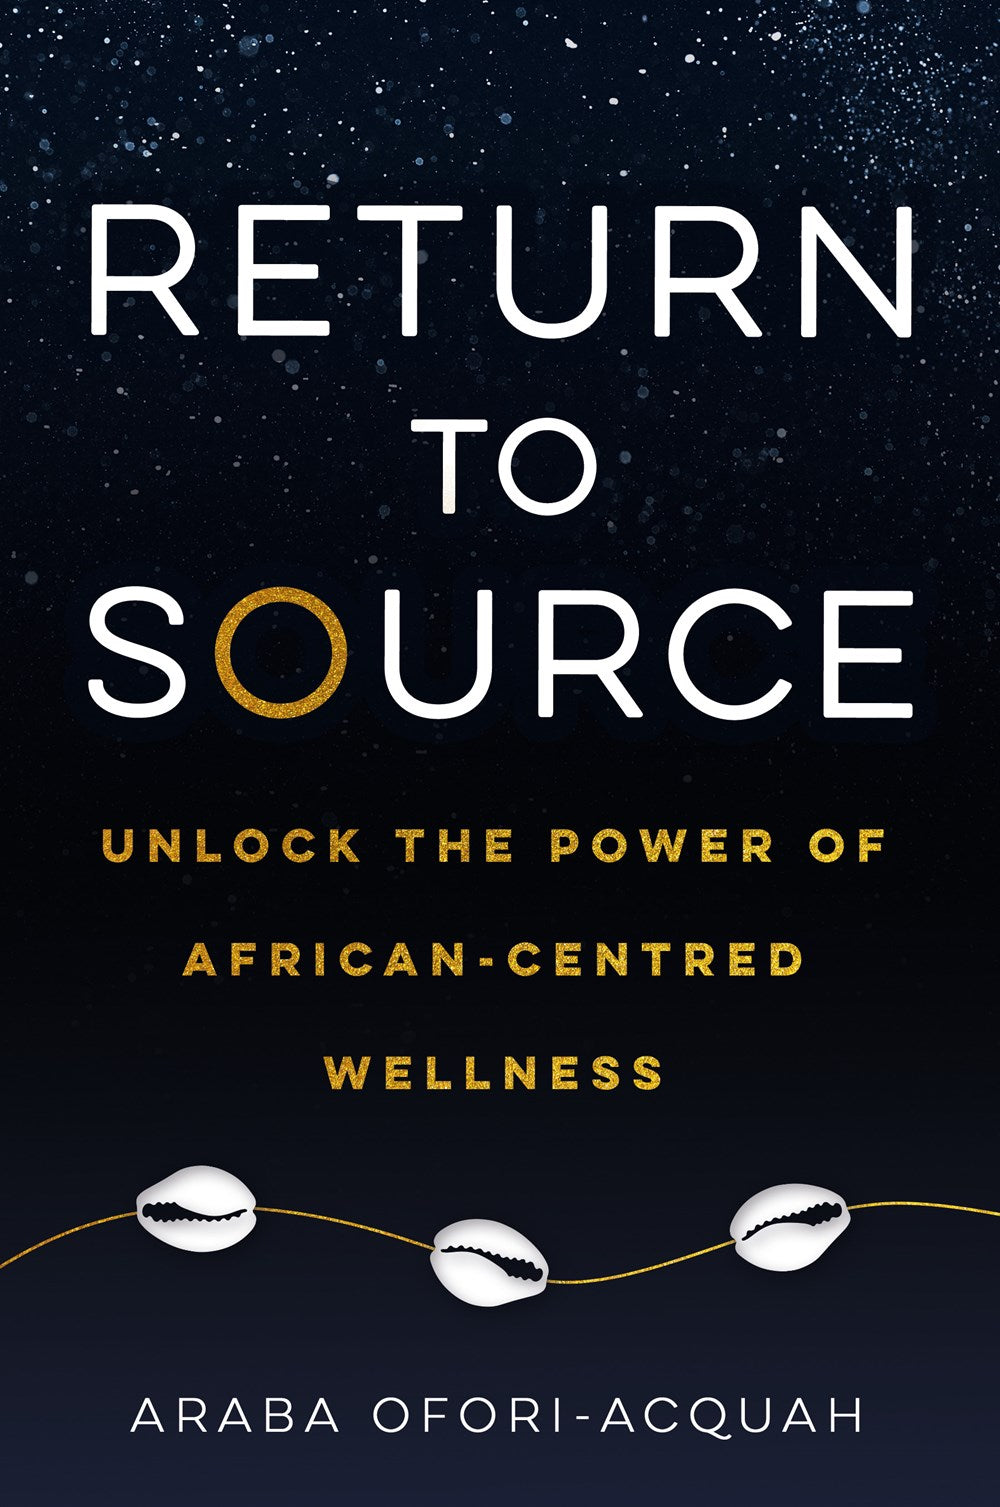 Return to Source: Unlock the Power of African-Centered Wellness